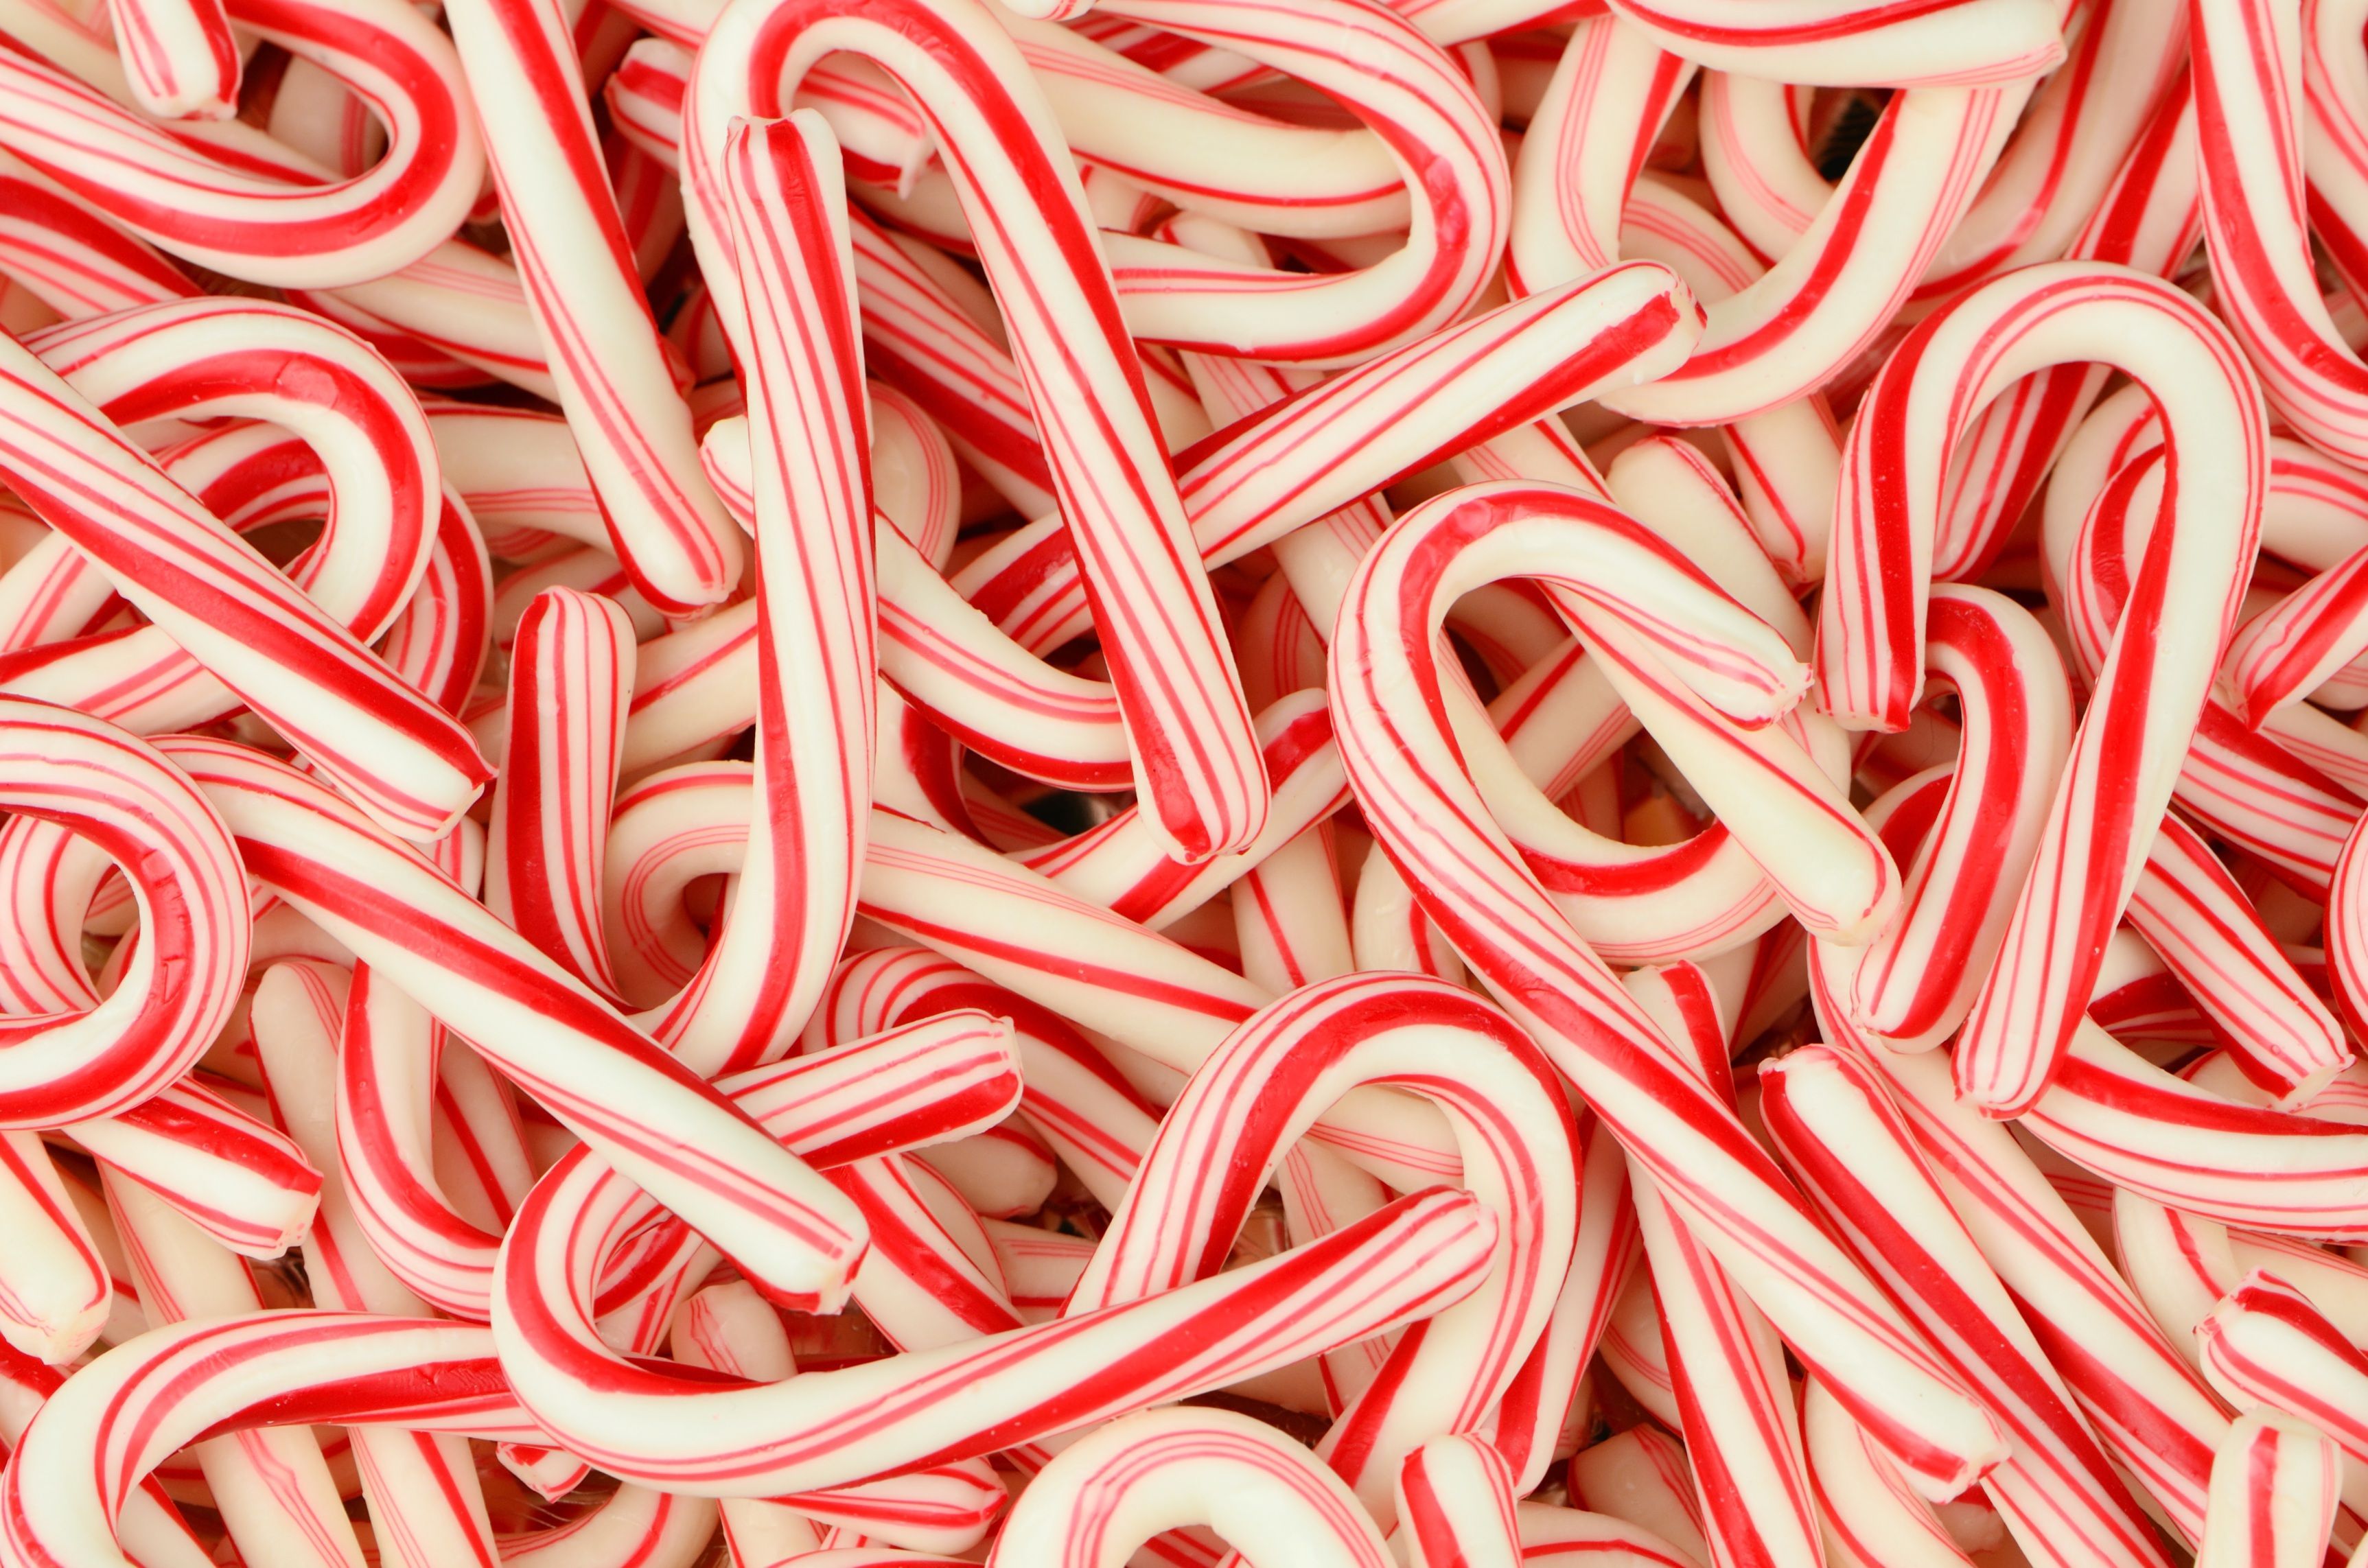 A close up of candy canes - Candy cane, candy